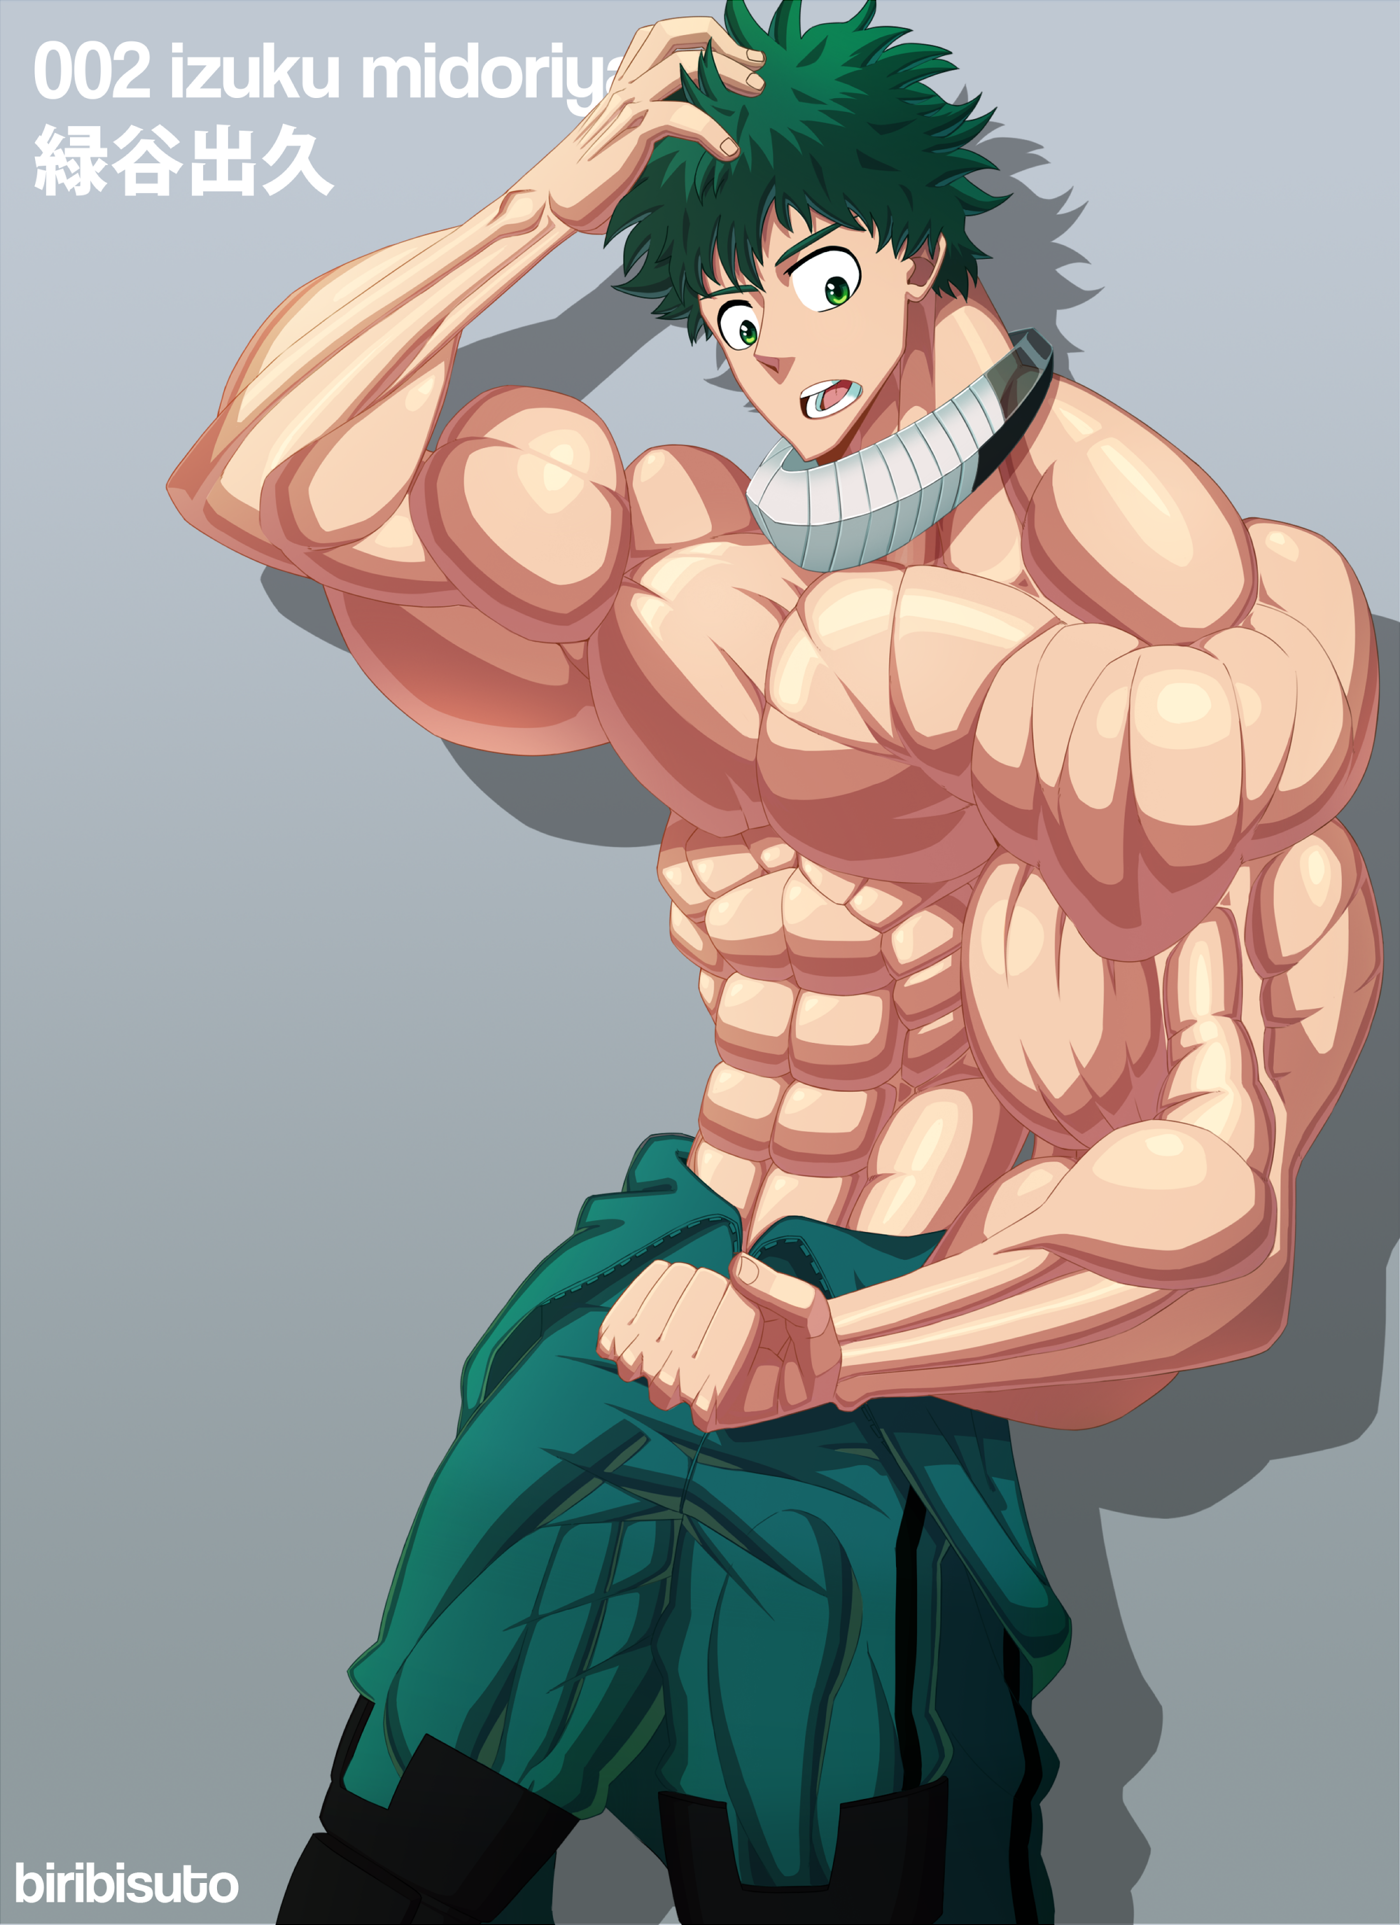 Really like they make skinny Deku to get rammed by others while still... 